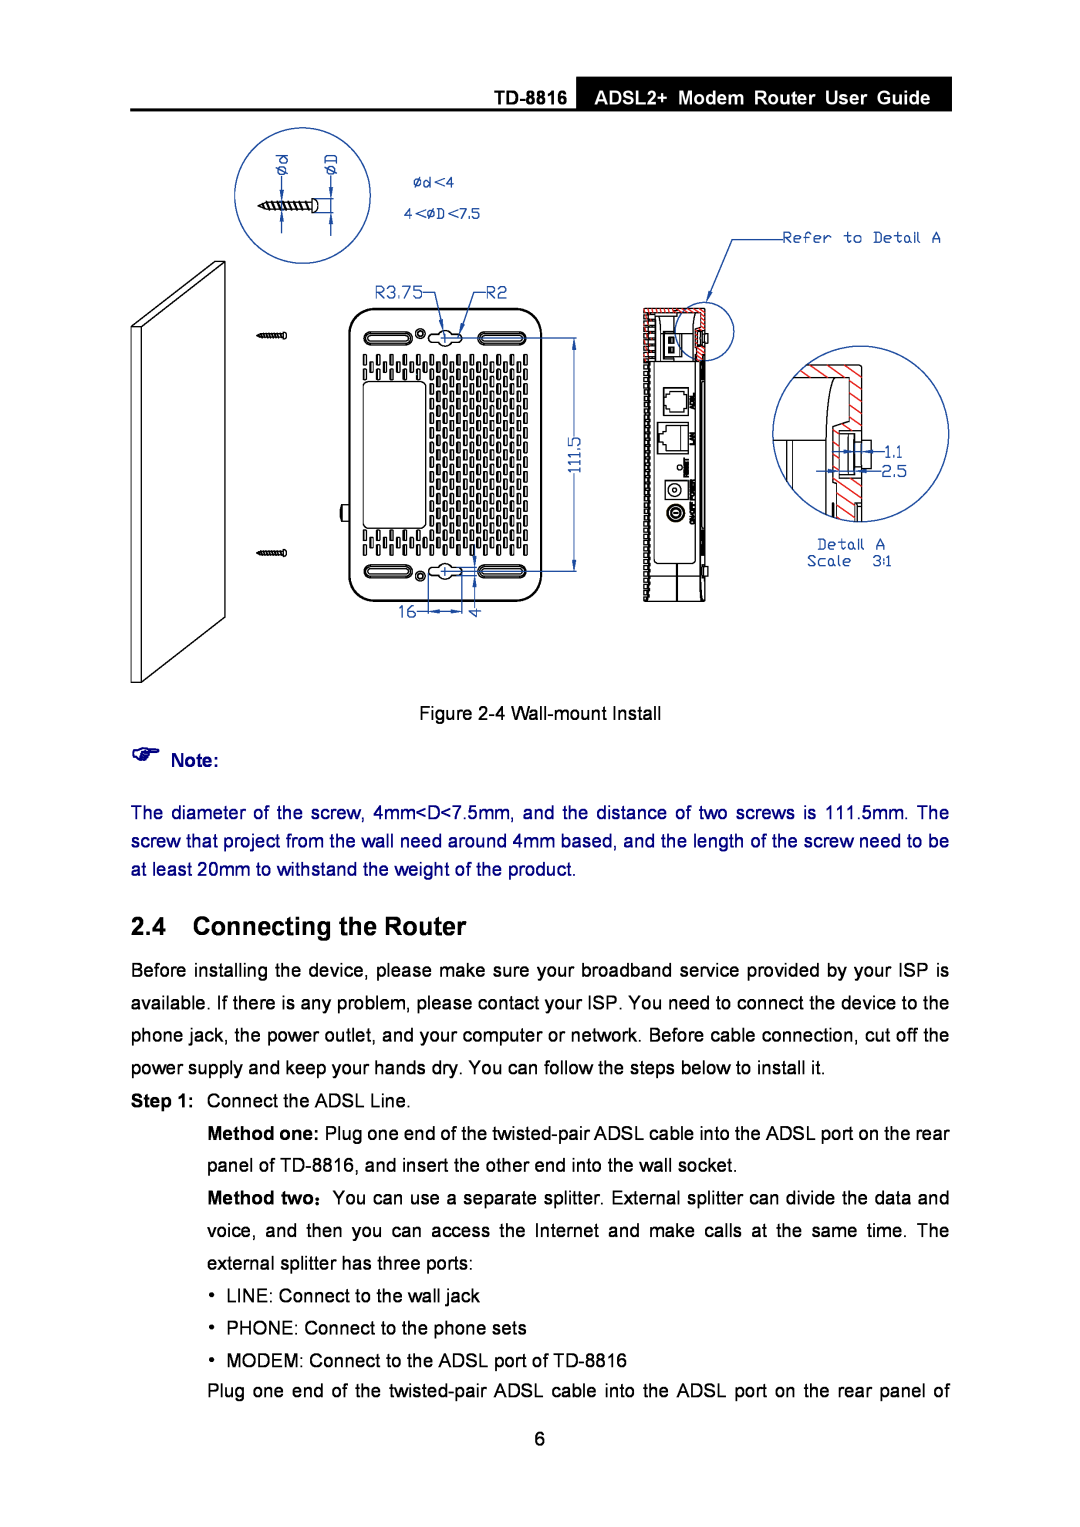 TP-Link TD-8816 manual Connecting the Router, ADSL2+ Modem Router User Guide,  Note 